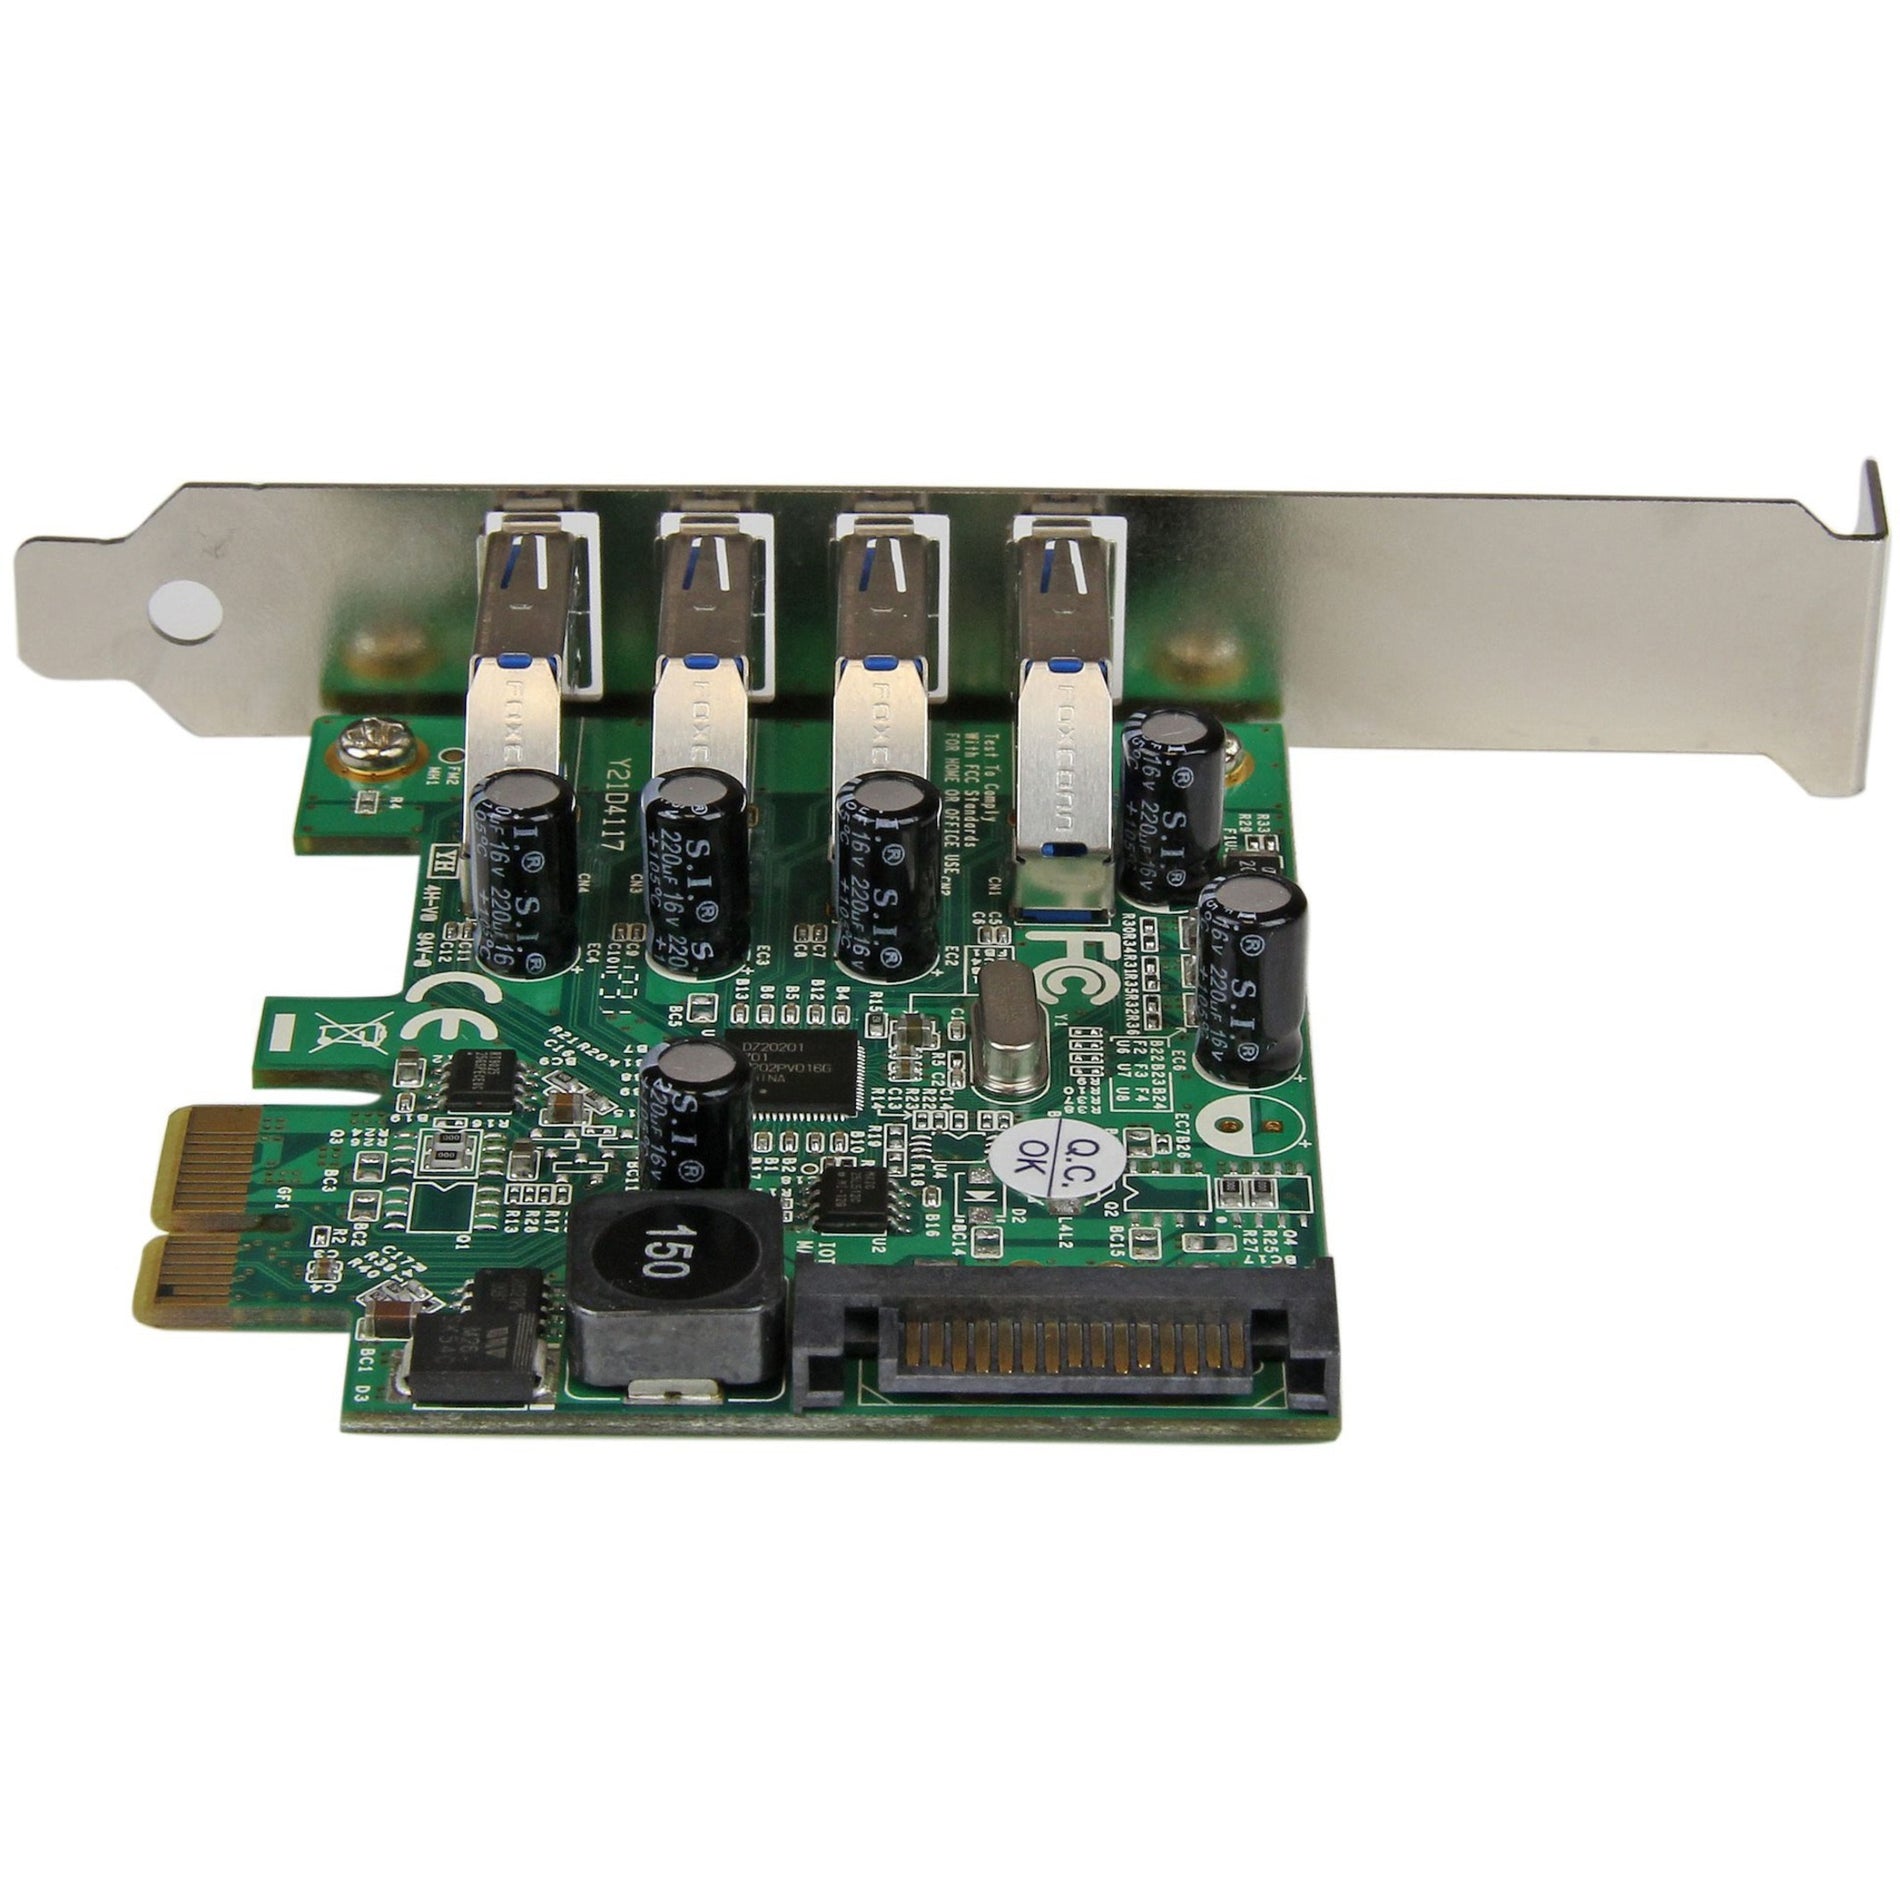 StarTech.com PEXUSB3S4V 4 Port PCI Express PCIe SuperSpeed USB 3.0 Controller Card Adapter with SATA Power - Low Profile, Fast Data Transfer and Easy Connectivity